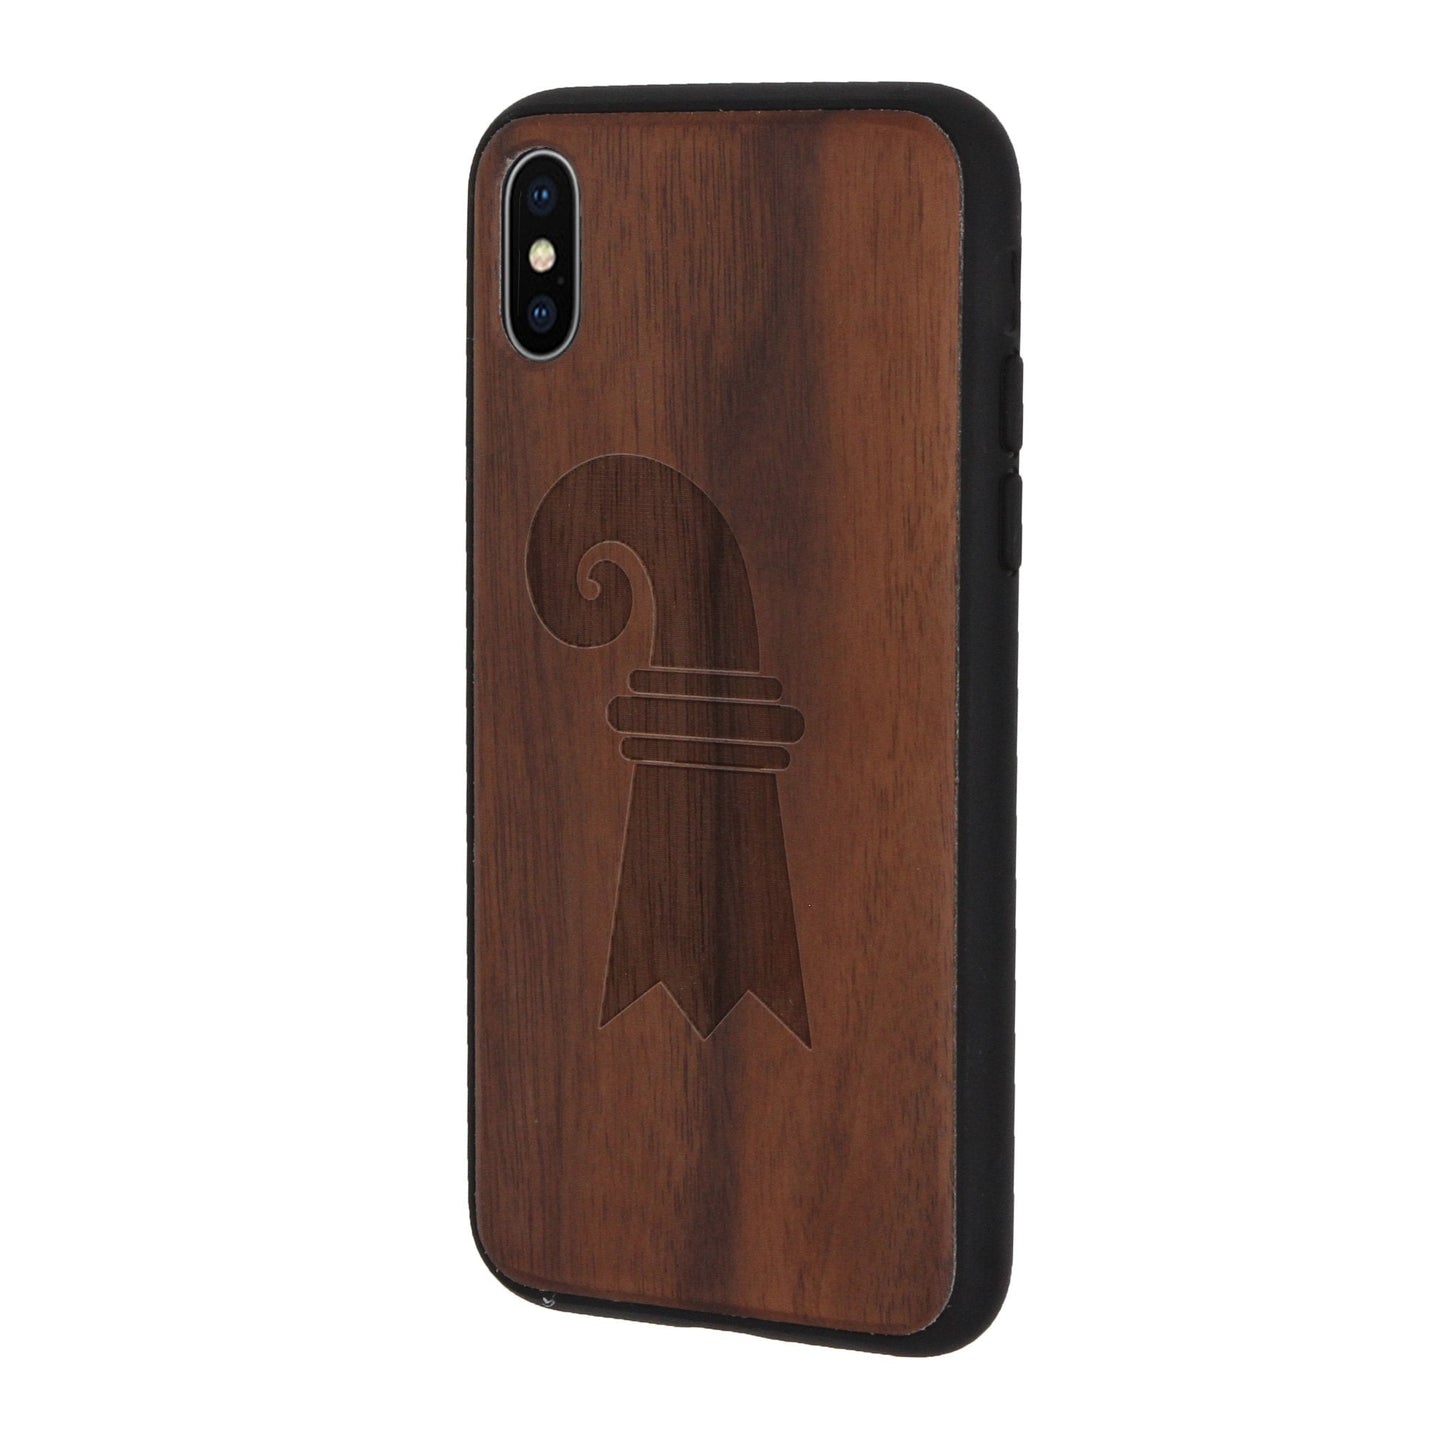 Baslerstab Eden case made of walnut wood for iPhone XS Max